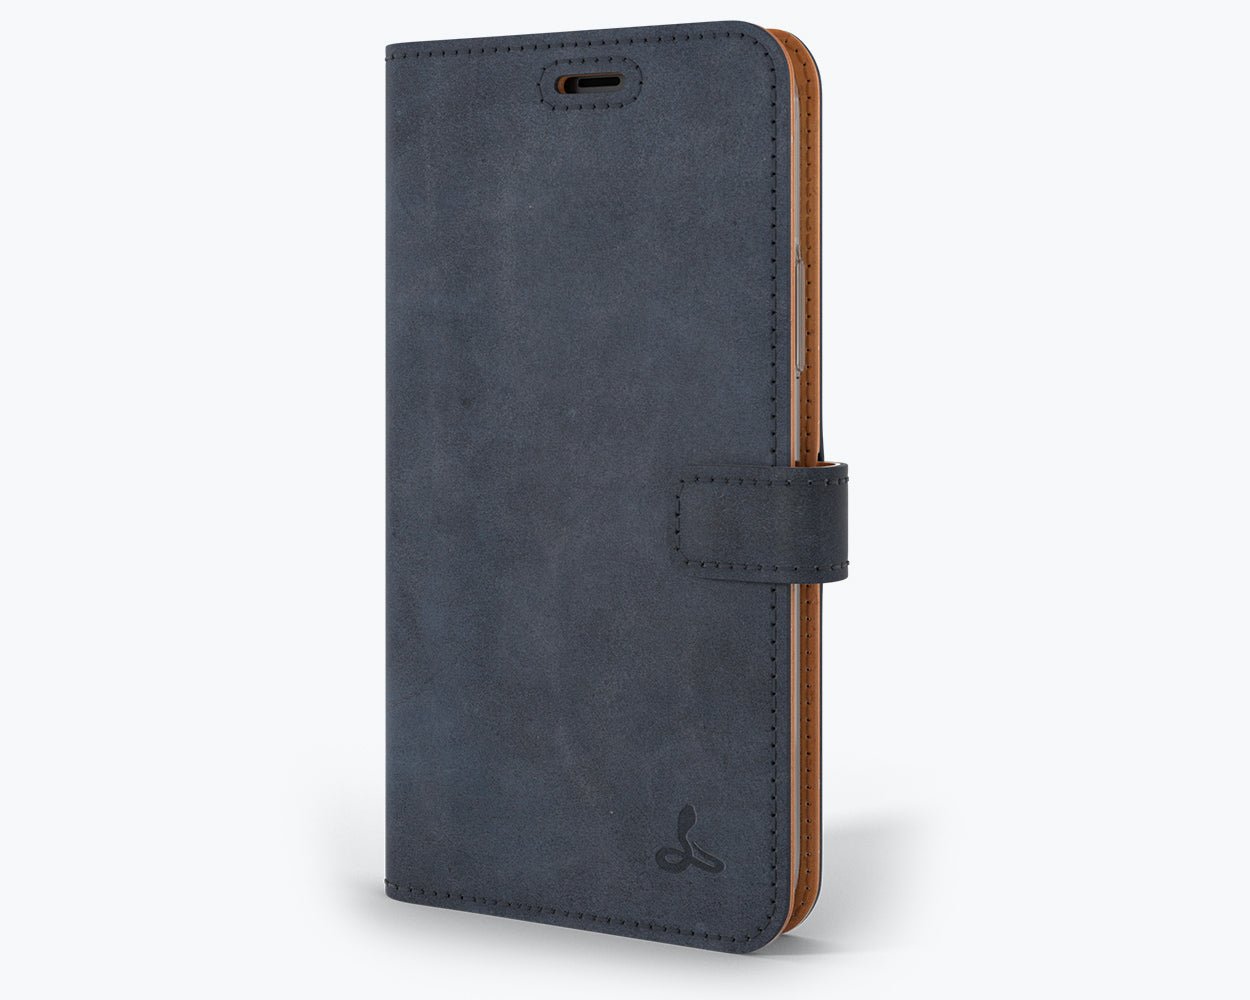 Apple iPhone 11 Pro Max - Vintage Leather Wallet Navy Apple iPhone 11 Pro Max - Snakehive UK